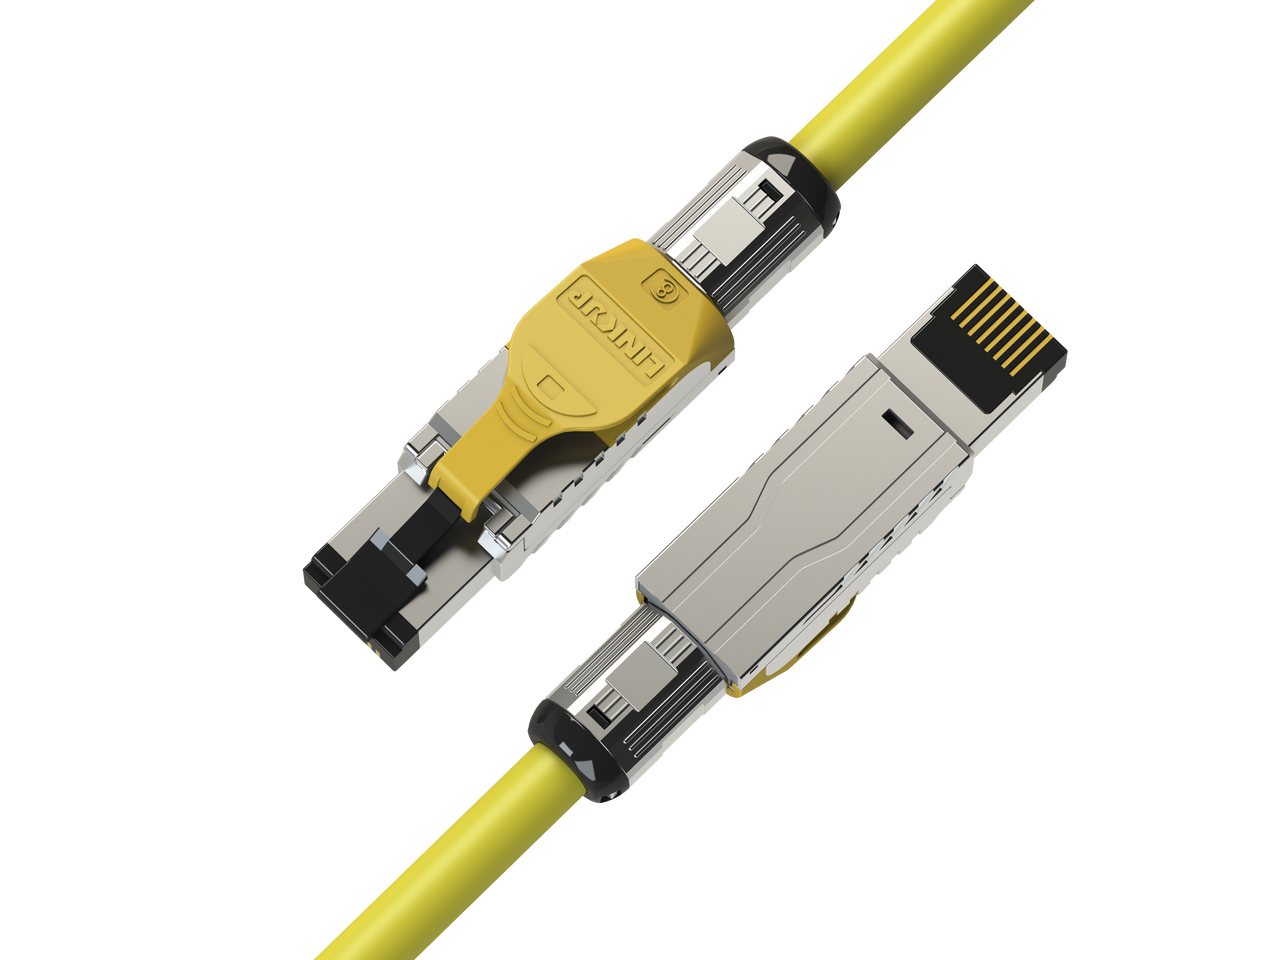 LINKUP] Cat8 Ethernet Patch Cable S/FTP 4 Pair 22AWG Screened 